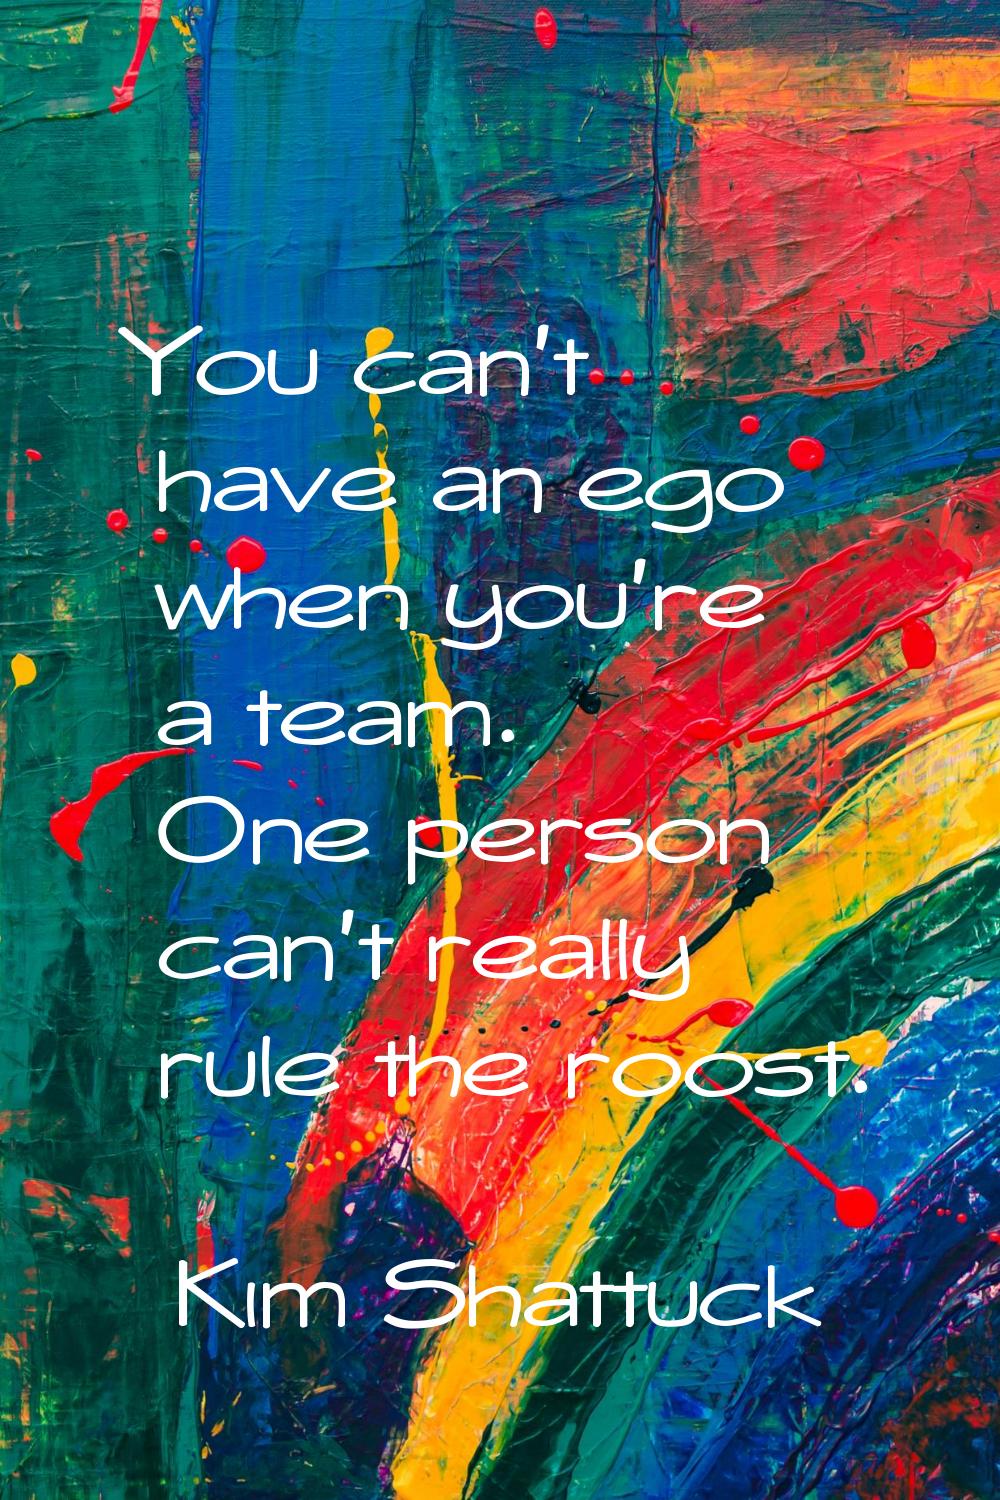 You can't have an ego when you're a team. One person can't really rule the roost.